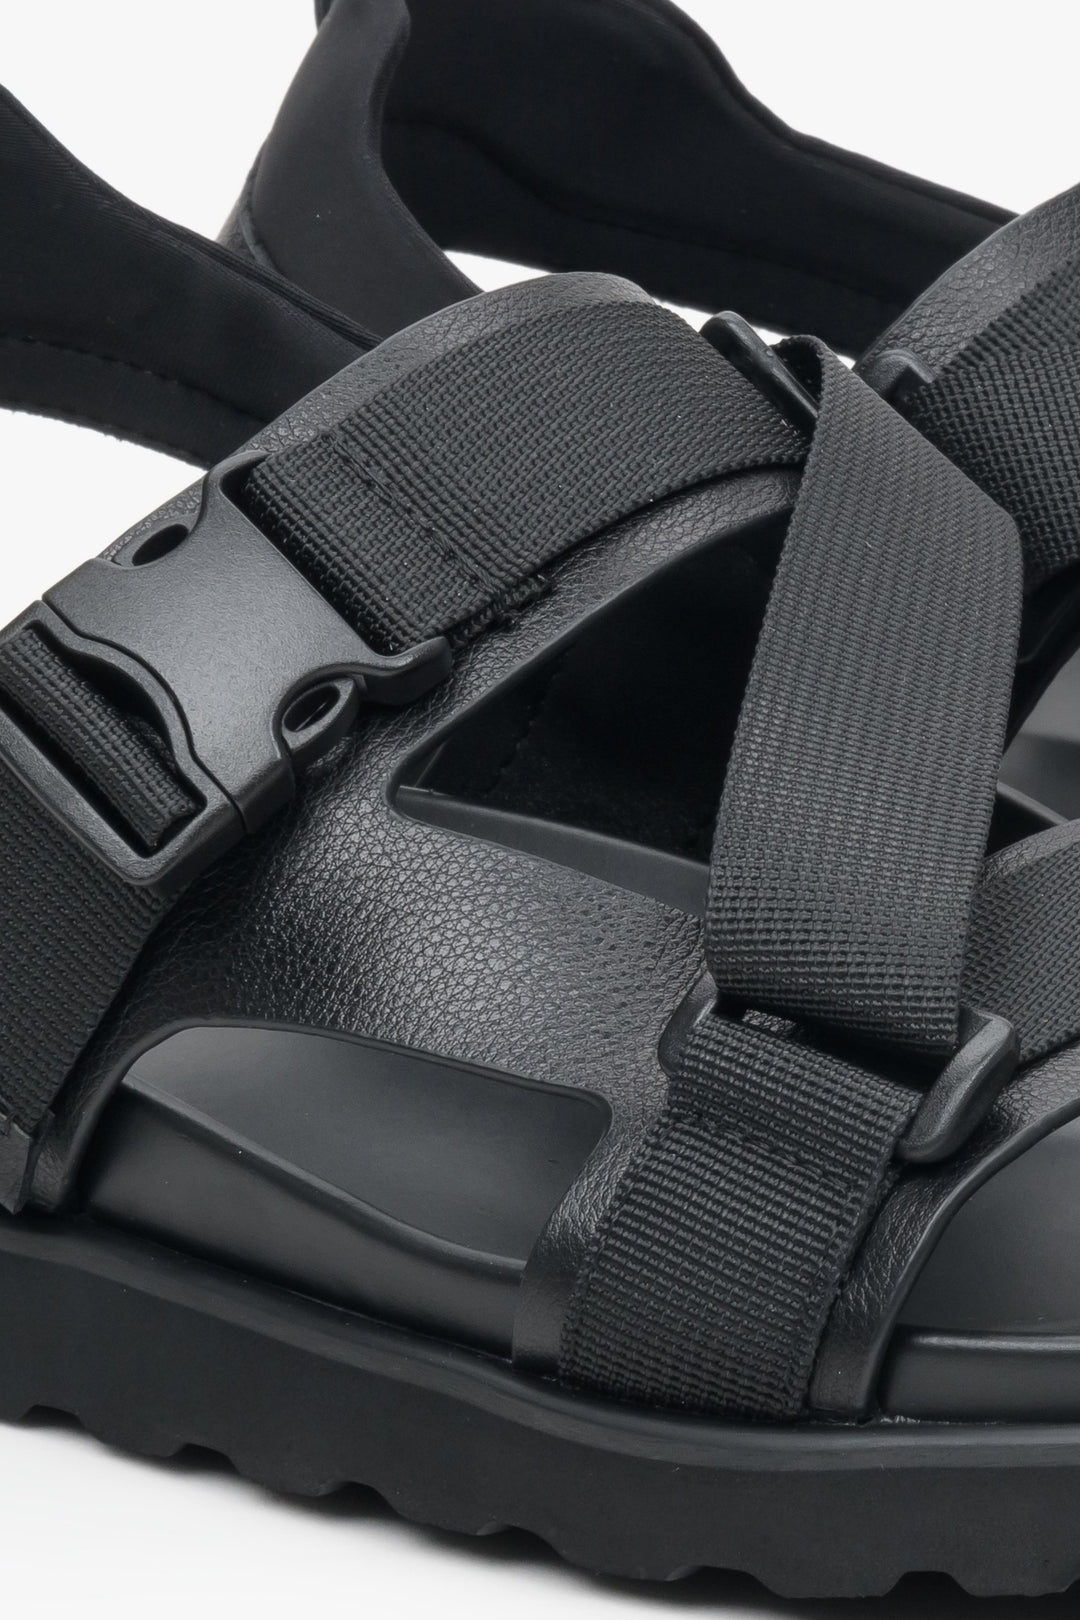 Comfortable men's summer sandals in black, made from genuine leather and textiles - close-up on the details.